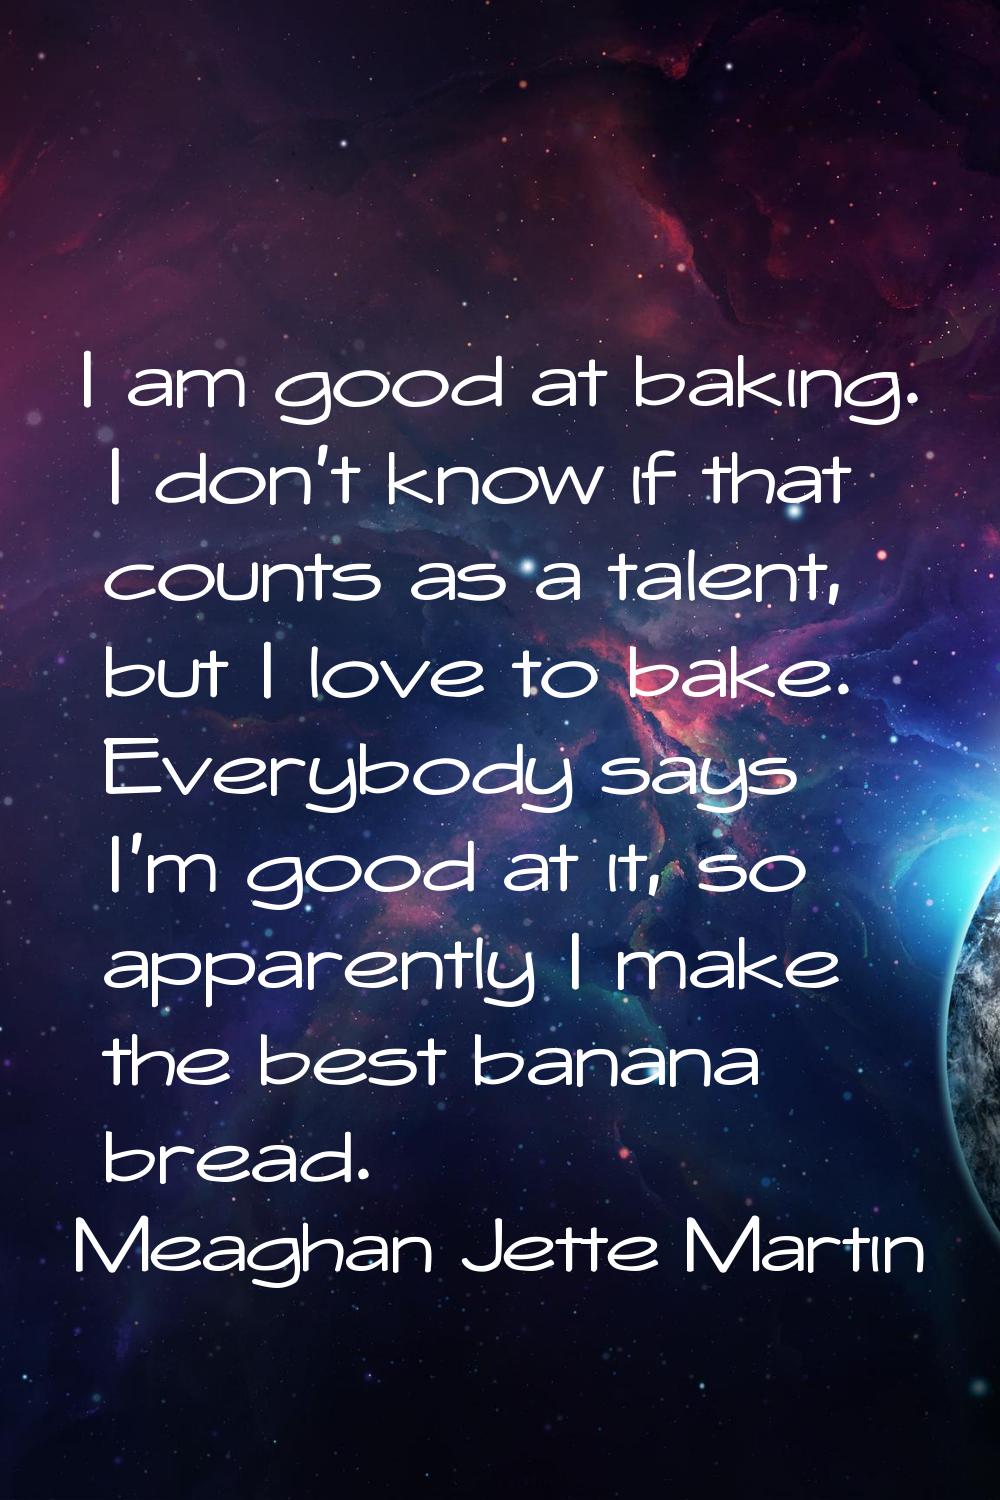 I am good at baking. I don't know if that counts as a talent, but I love to bake. Everybody says I'